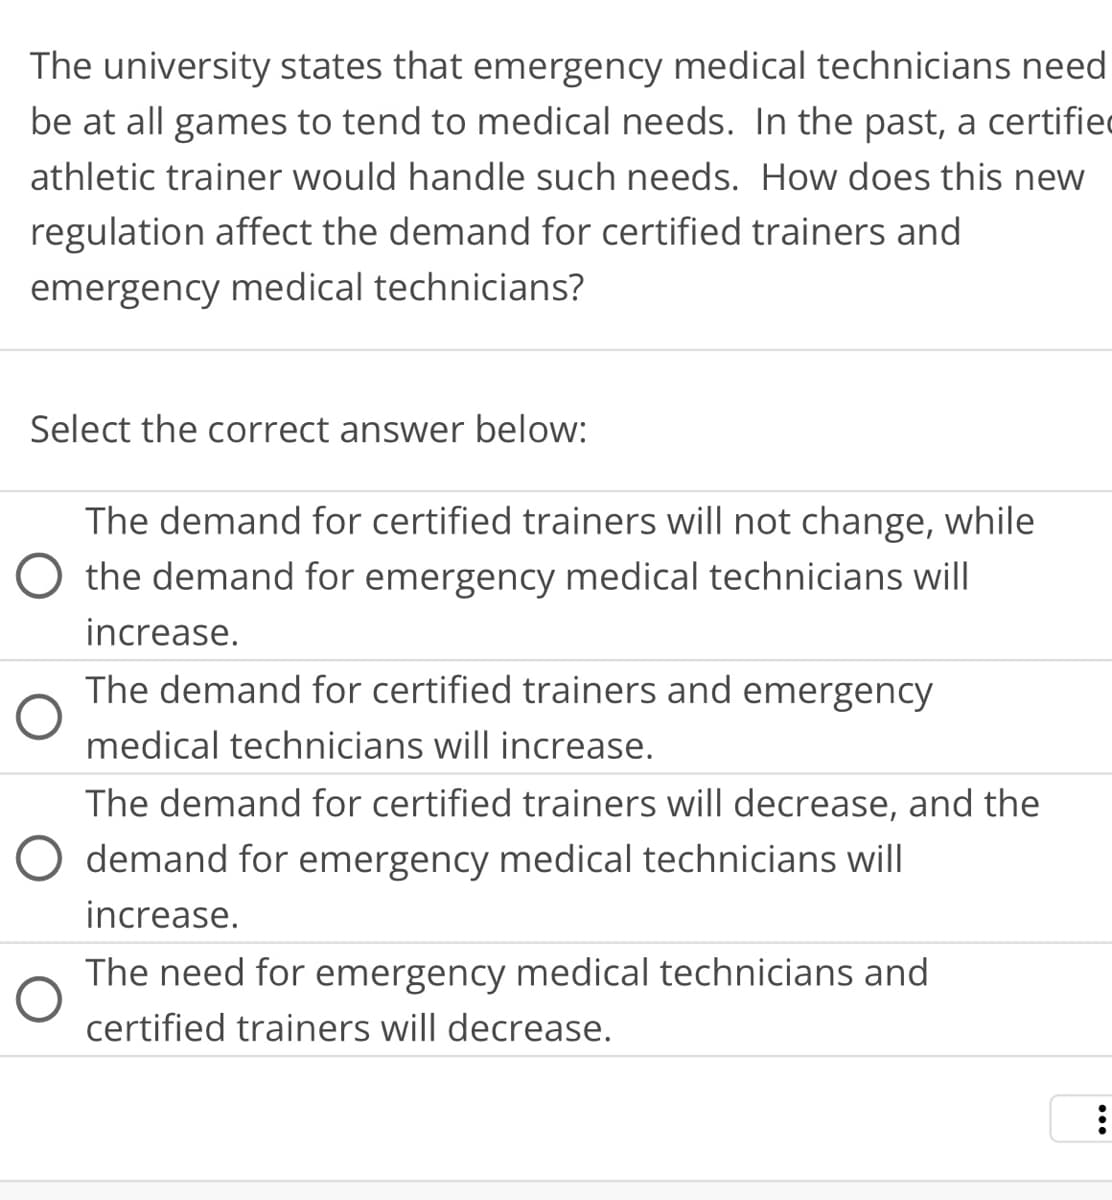 The university states that emergency medical technicians need
be at all games to tend to medical needs. In the past, a certifie
athletic trainer would handle such needs. How does this new
regulation affect the demand for certified trainers and
emergency medical technicians?
Select the correct answer below:
The demand for certified trainers will not change, while
O the demand for emergency medical technicians will
increase.
The demand for certified trainers and emergency
medical technicians will increase.
The demand for certified trainers will decrease, and the
O demand for emergency medical technicians will
increase.
The need for emergency medical technicians and
certified trainers will decrease.